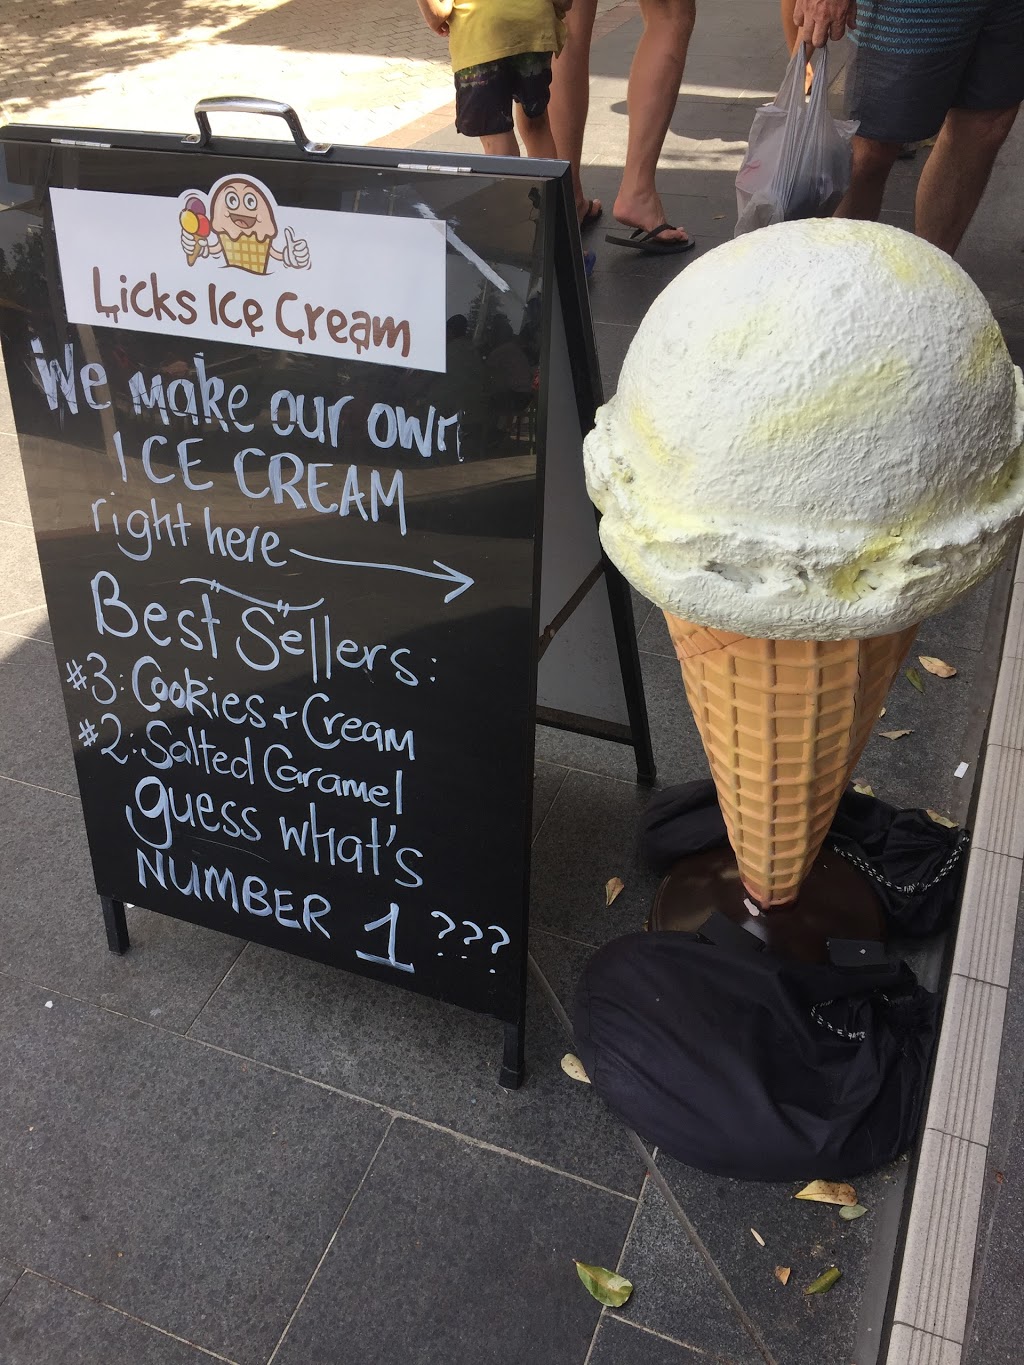 Licks Ice Cream | 105 The Entrance Road, The Entrance Waterfront Plaza, The Entrance NSW 2261, Australia | Phone: 0410 630 903